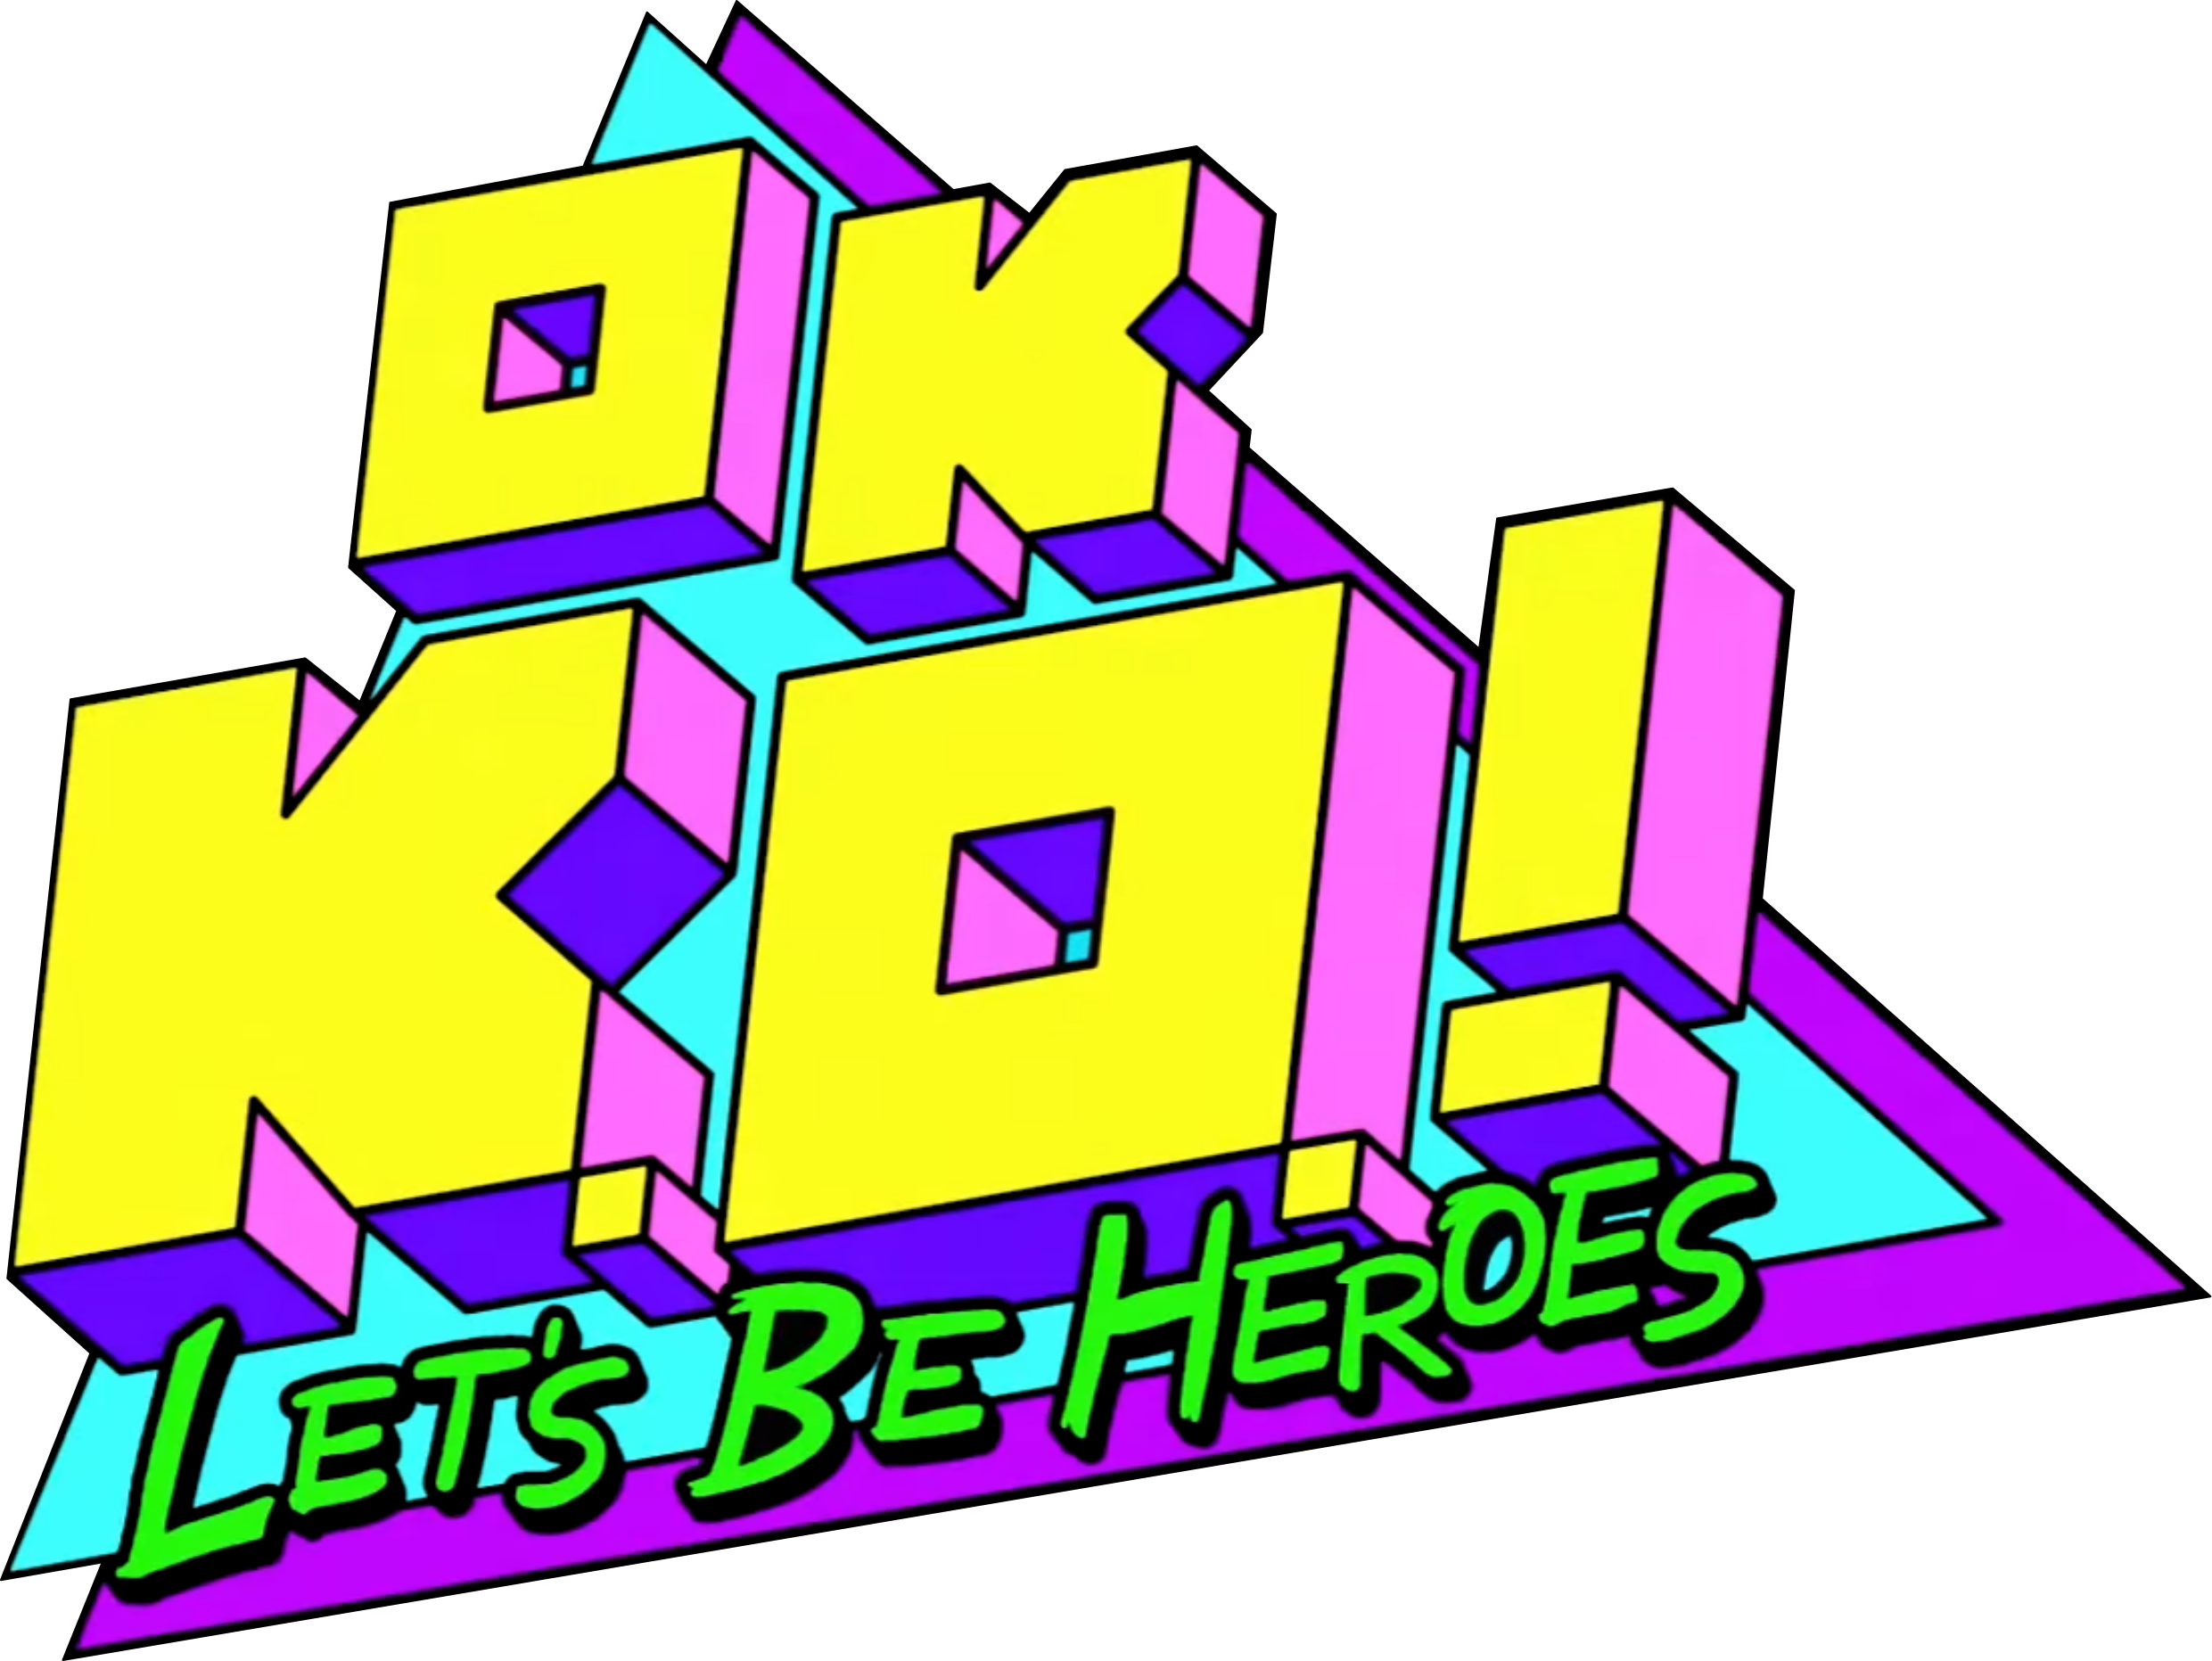 OK K.O.! Let's Play Heroes on Steam